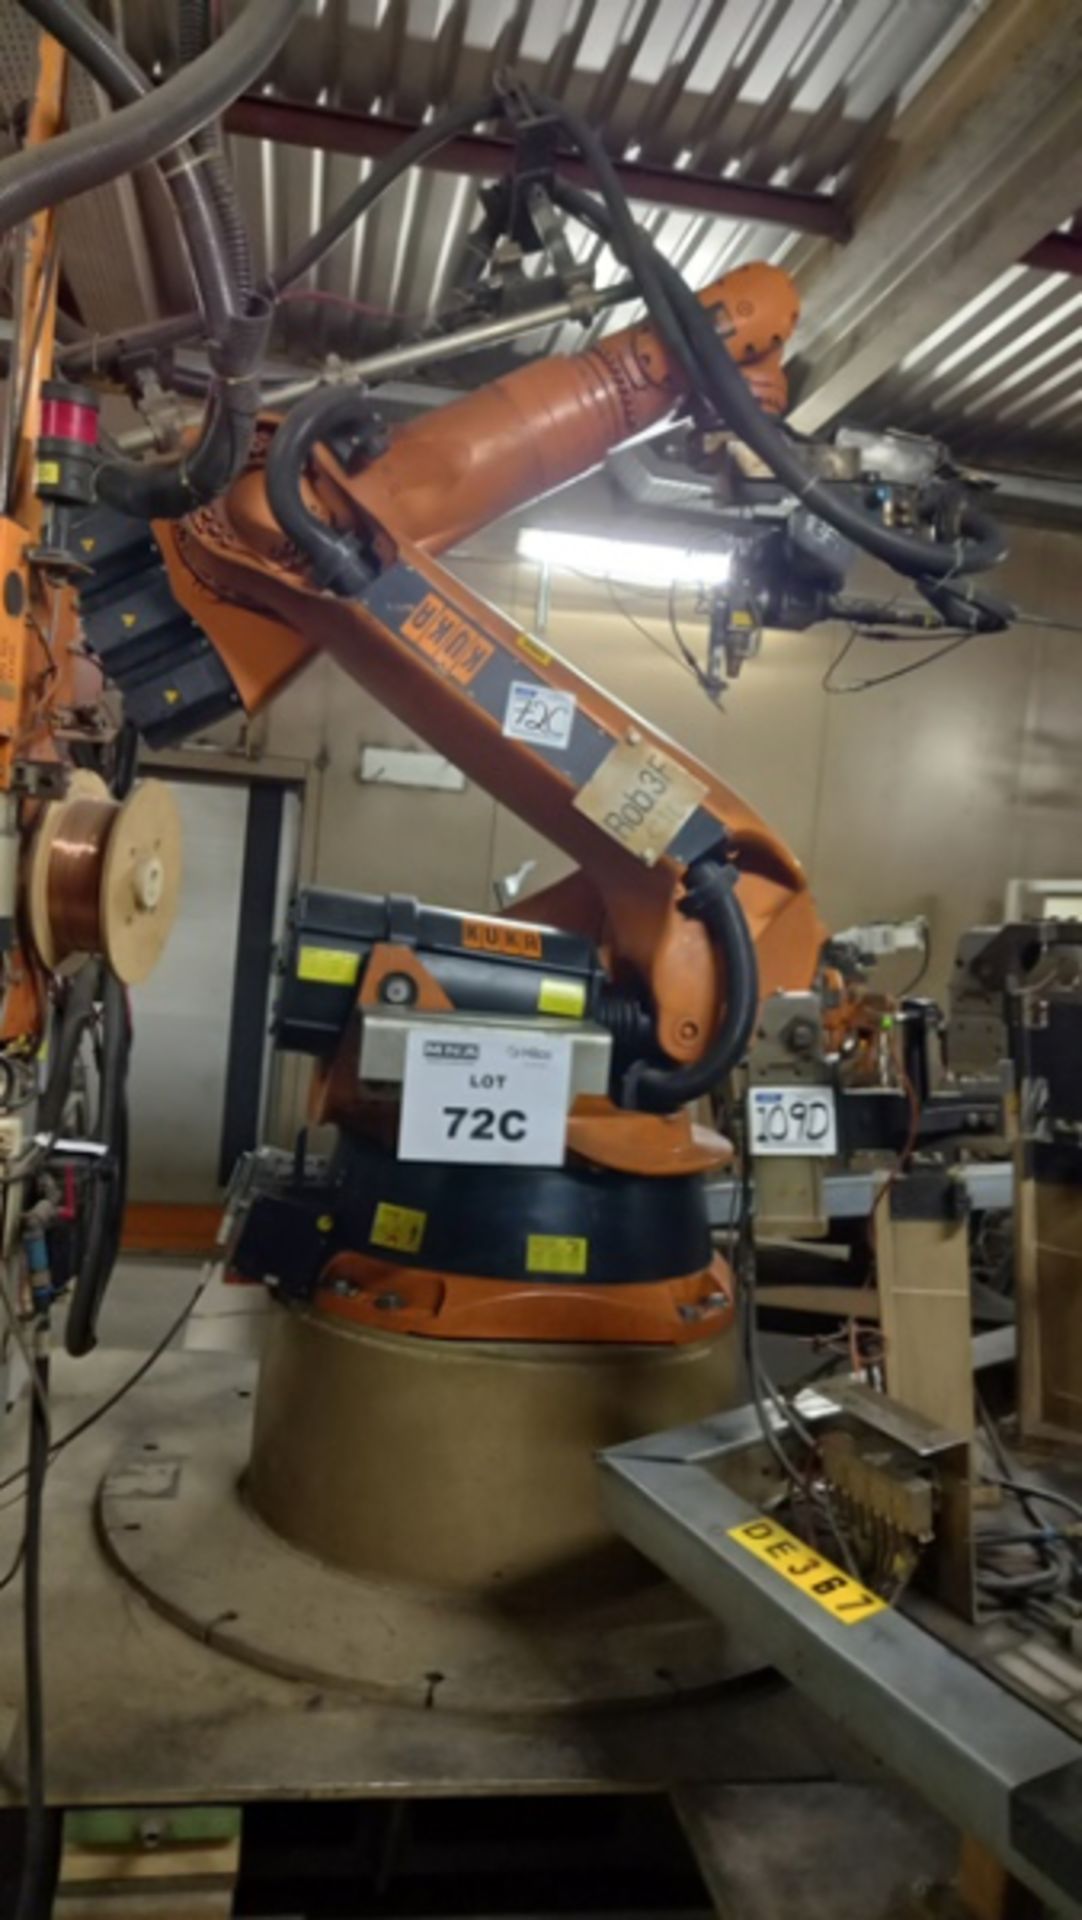 Kuka KR-2150L130 Robot, Maximum Reach: 2,900 mm, Rated Payload: 130 Kg, New 2003 - Image 2 of 7